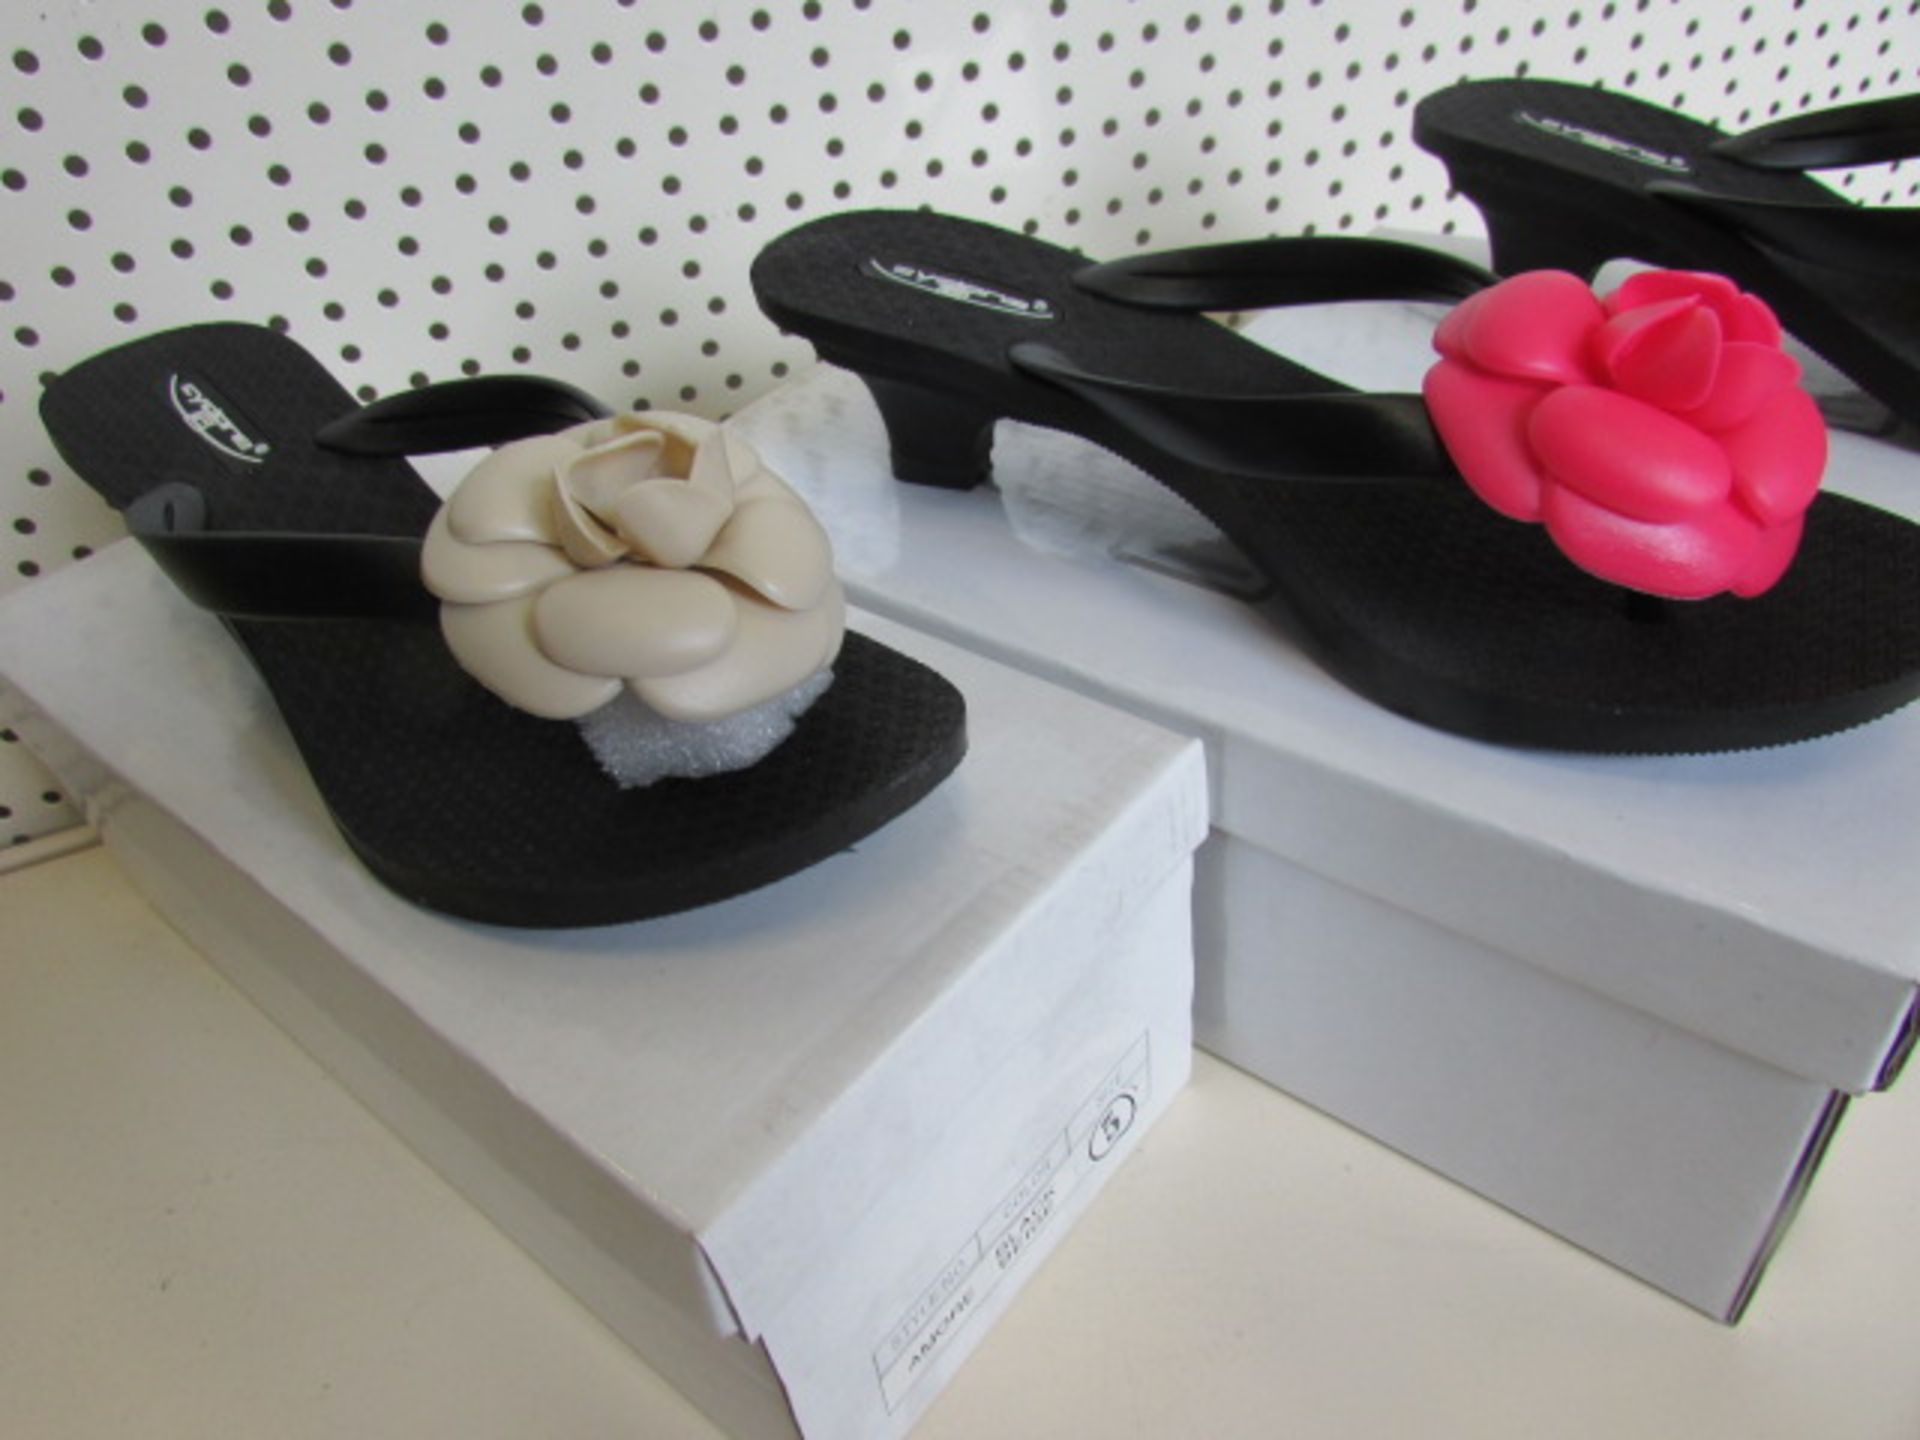 10 x Cyclone Amore Sandals In Various Sizes & Colours - Image 3 of 3